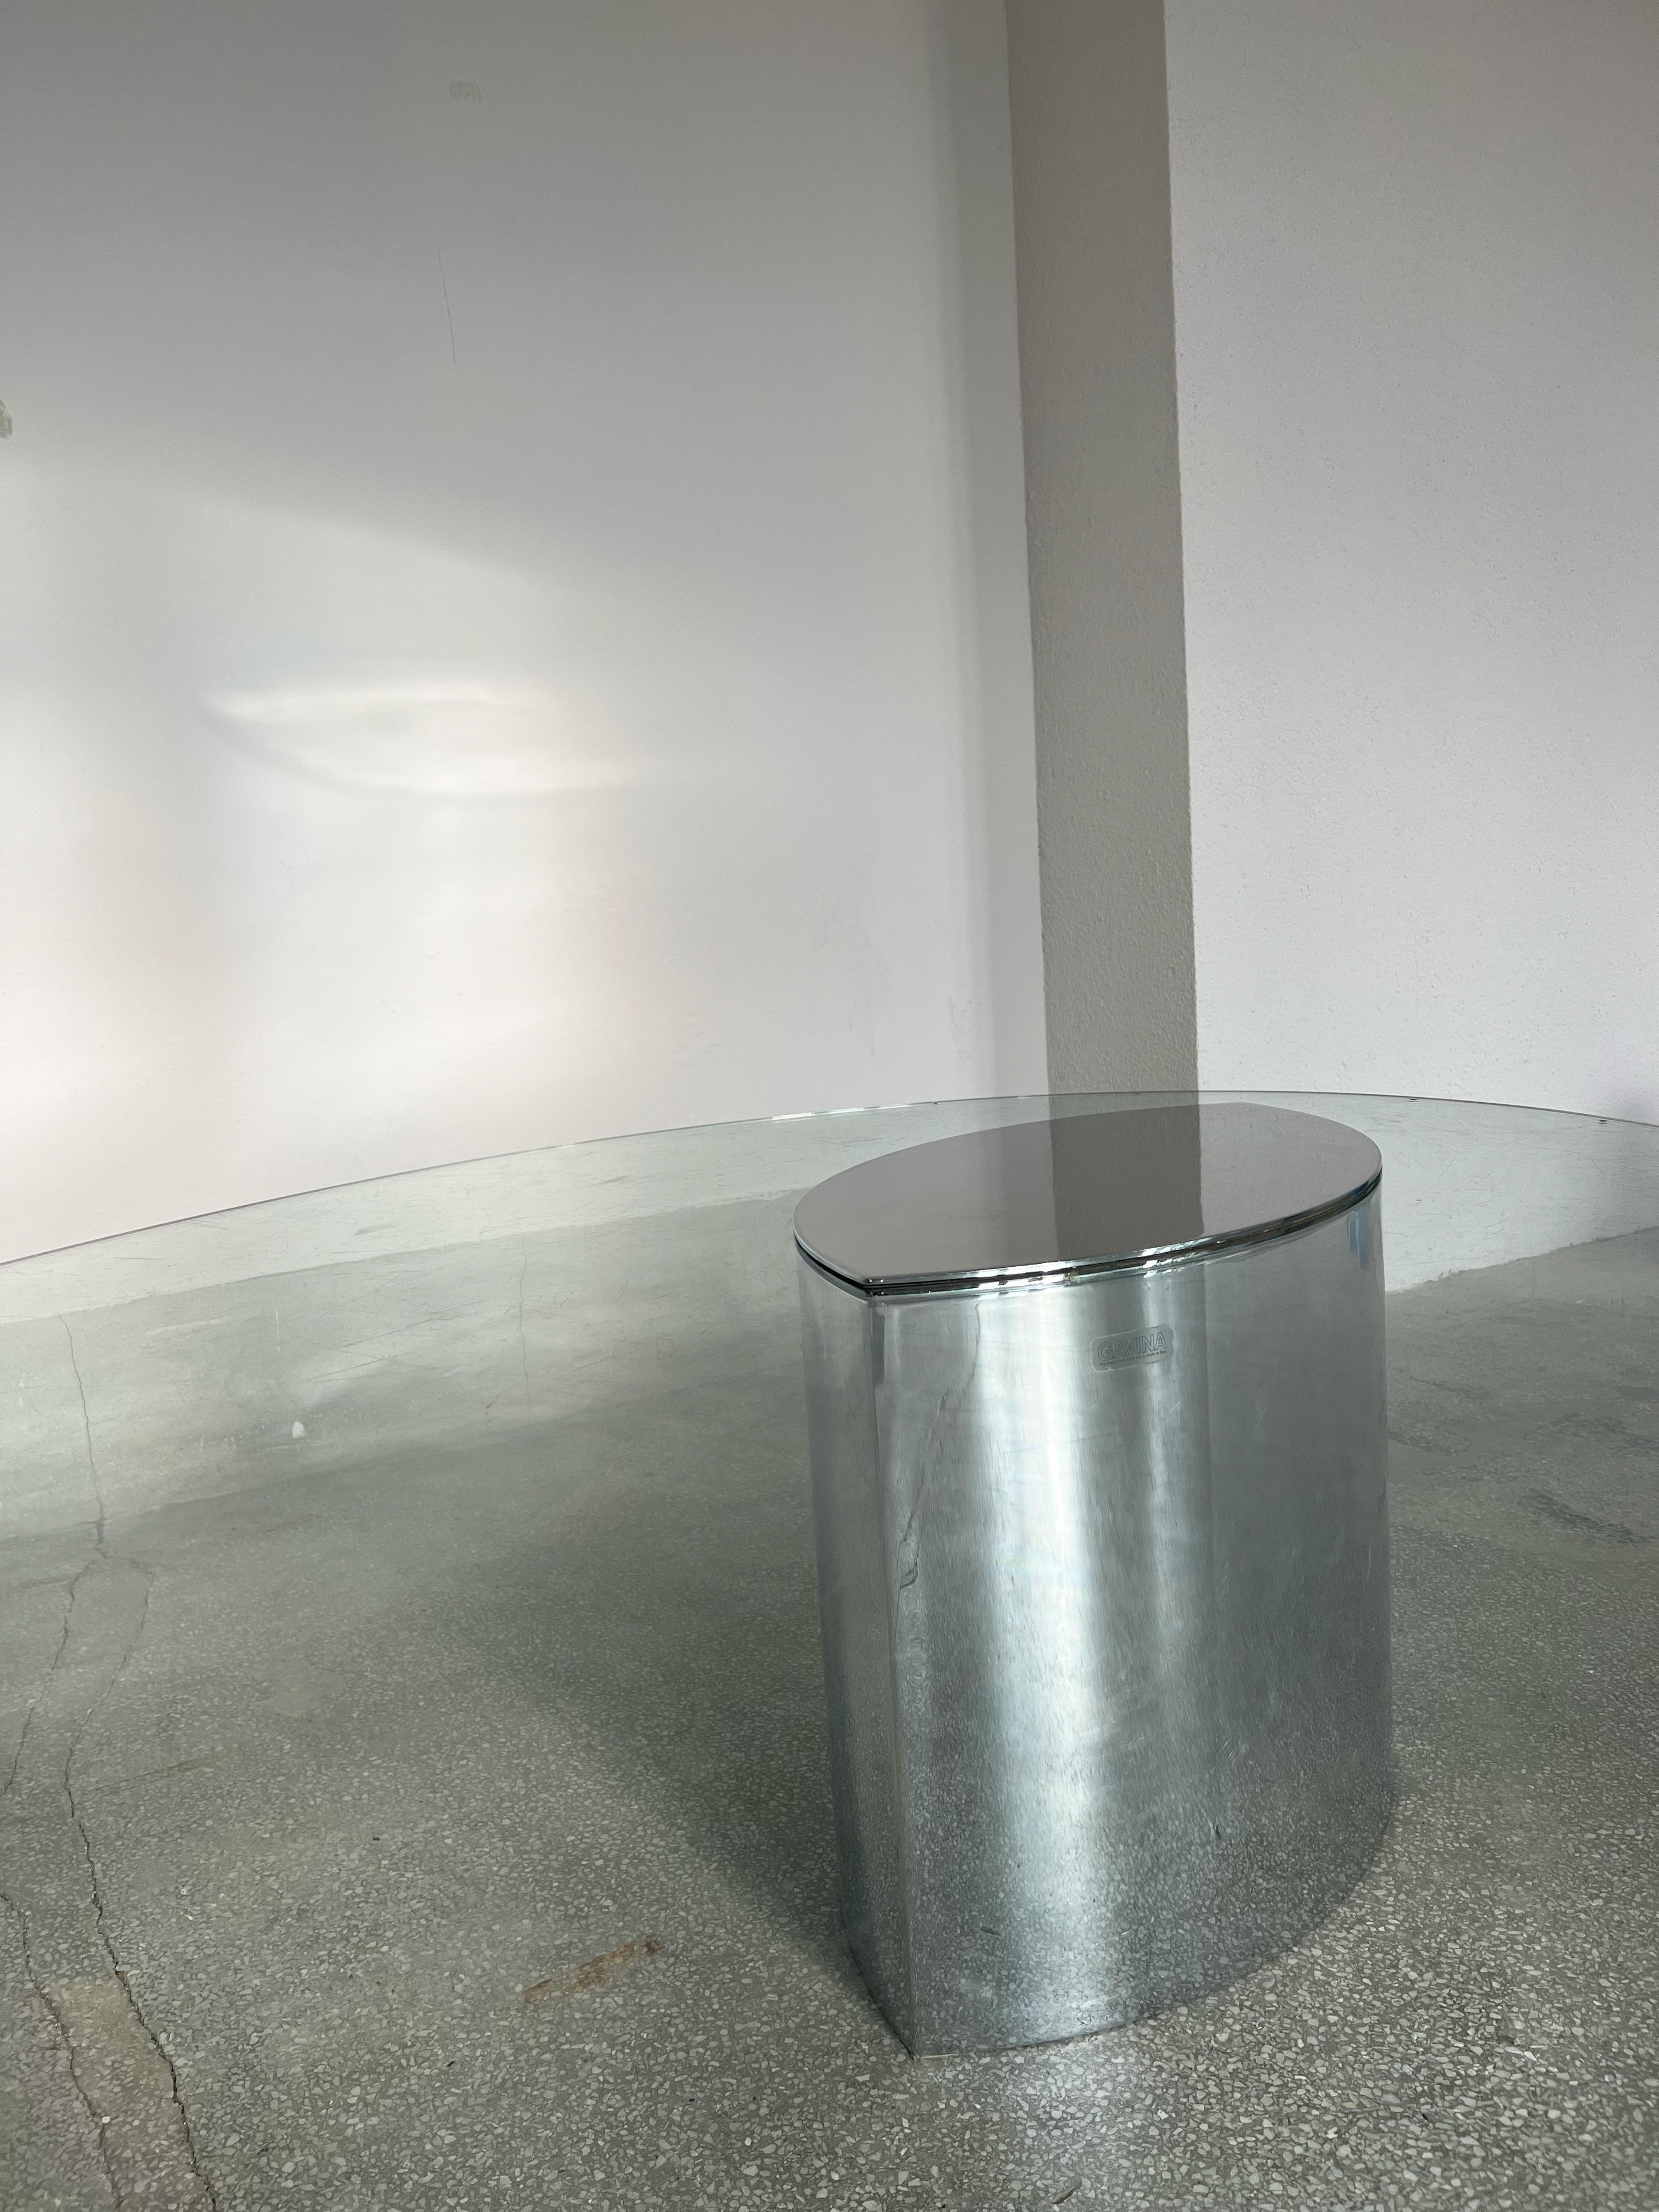 The Lunario low coffee table, a visionary creation by Cini Boeri and skillfully crafted by Gavina in 1970s Italy, stands as an exemplar of innovative design. This early masterpiece boasts a distinctive chrome-plated cantilever weighted base, a